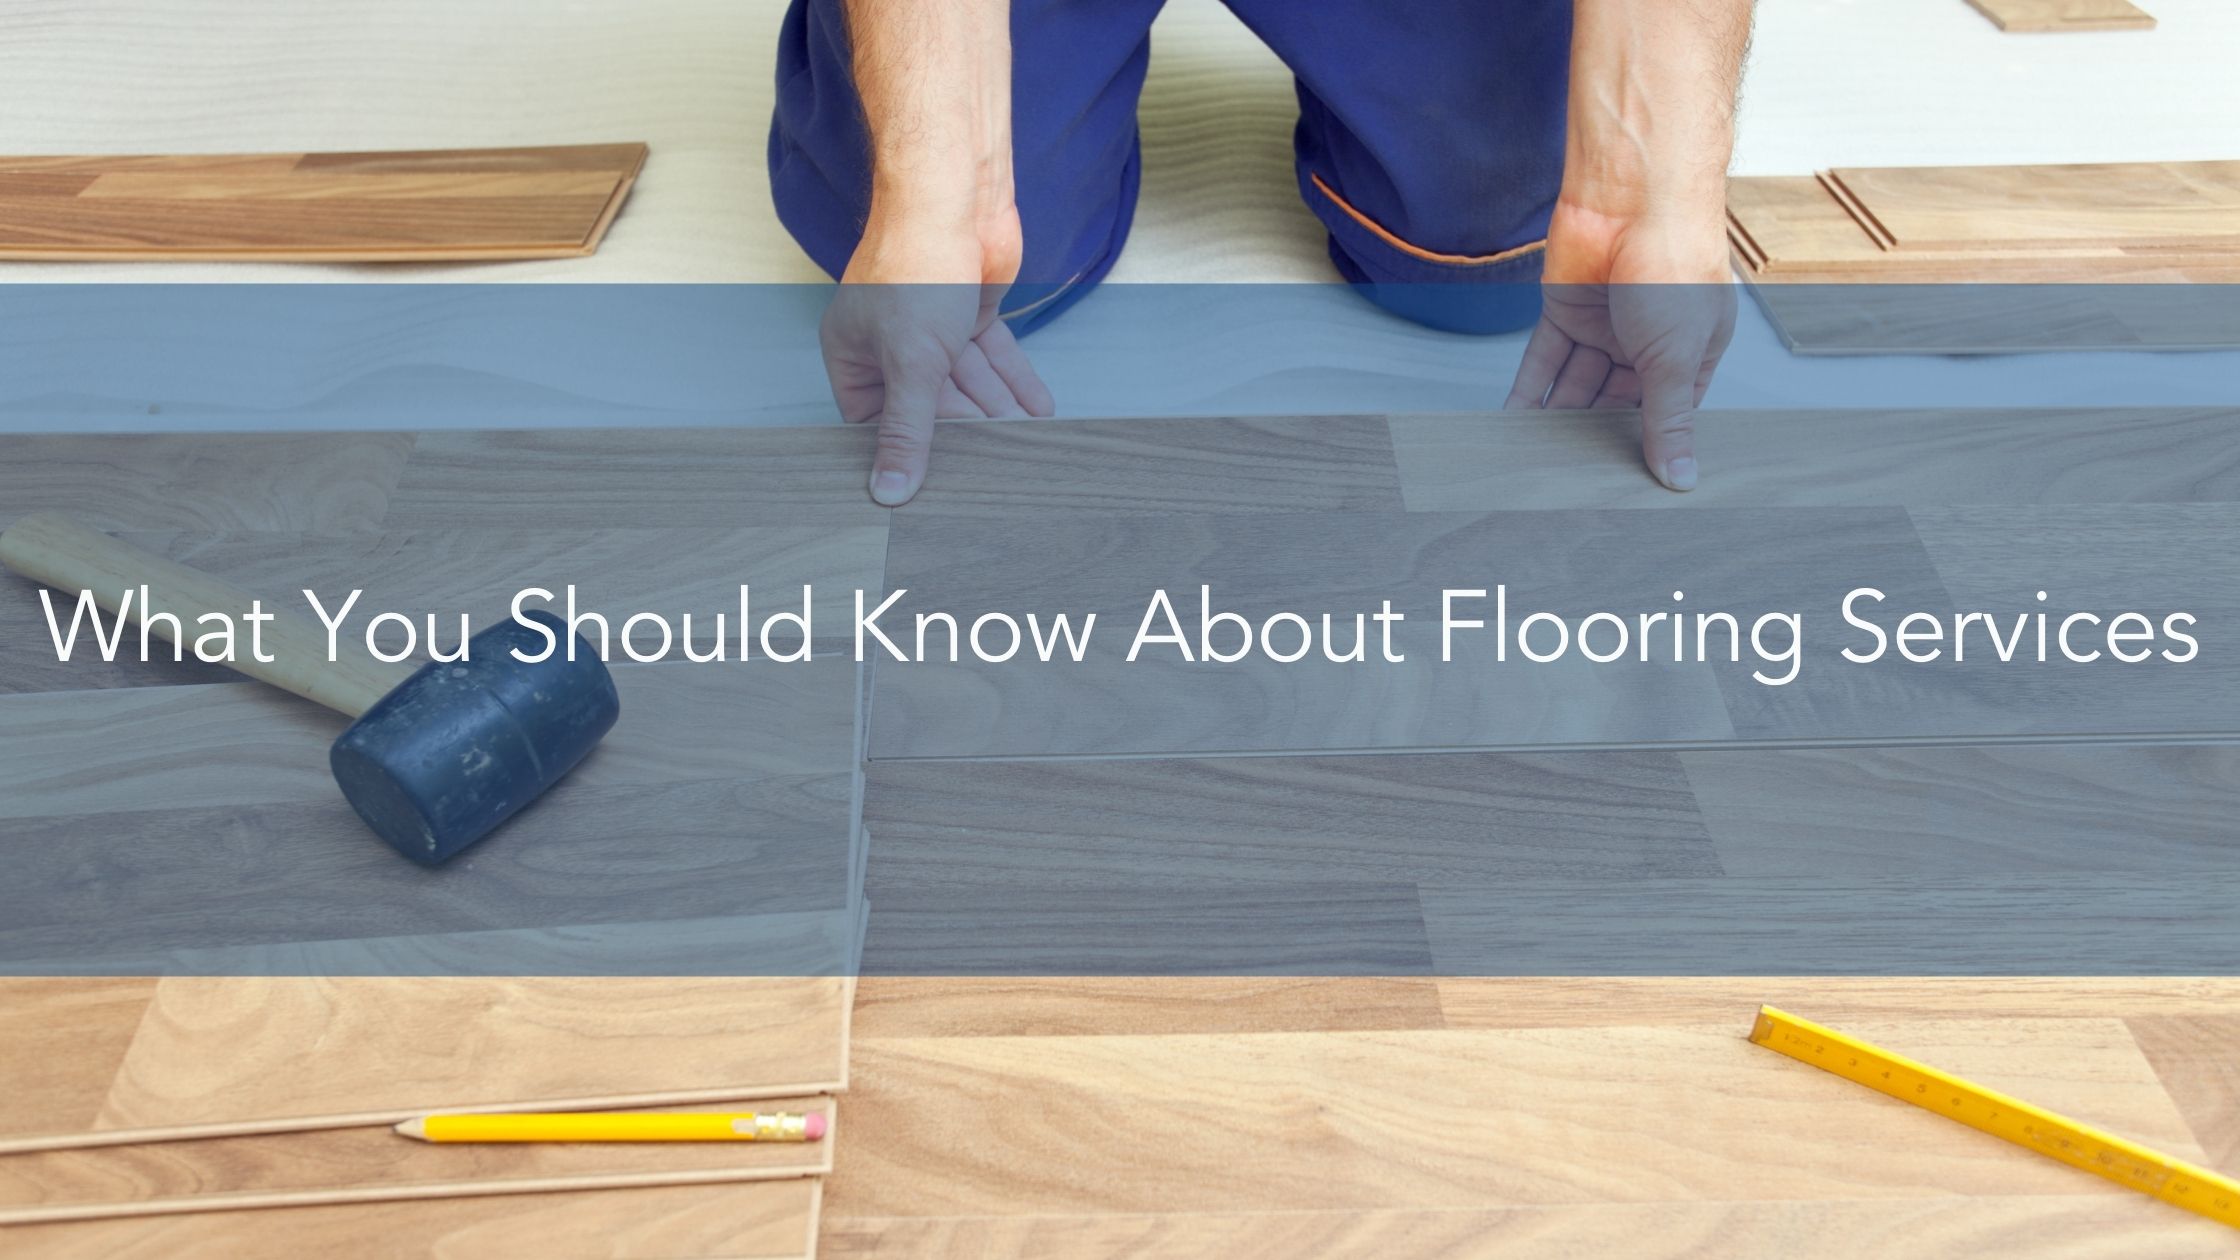 https://handymanconnection.com/wp-content/uploads/2021/11/What-You-Should-Know-About-Flooring-Services.jpg